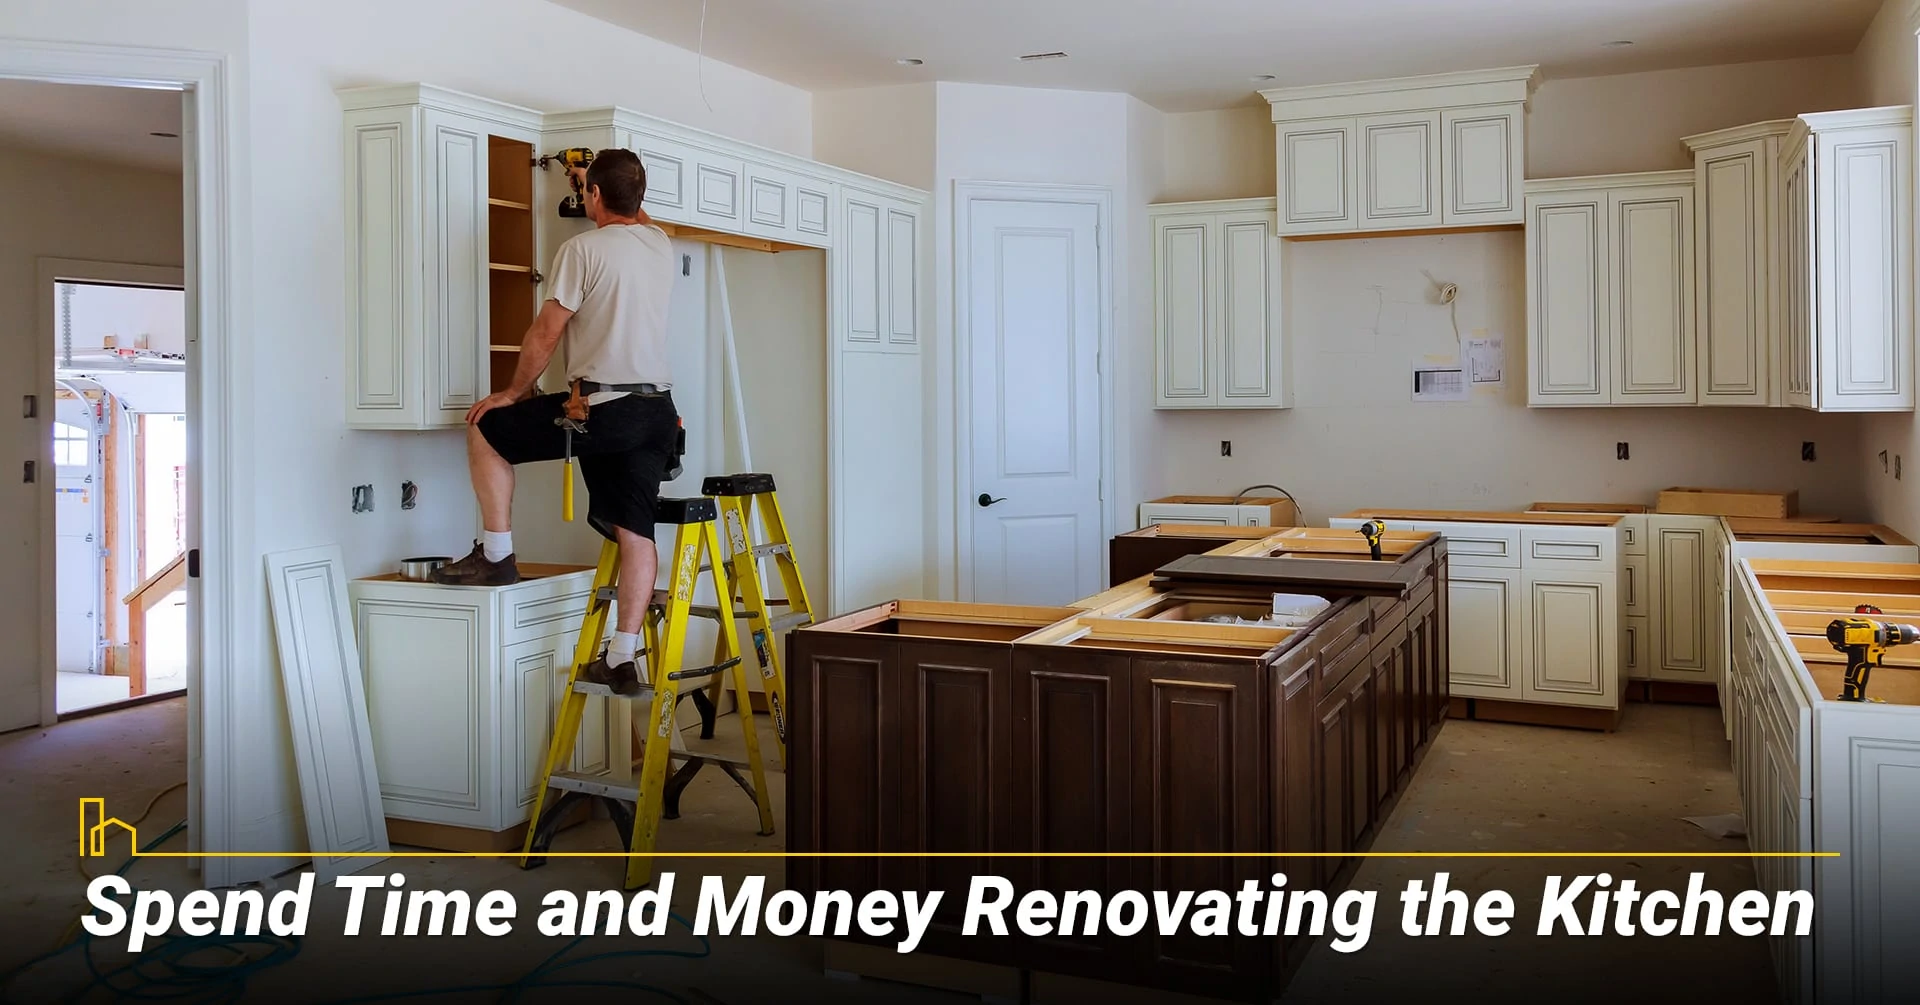 Spend Time and Money Renovating the Kitchen, upgrade your kitchen